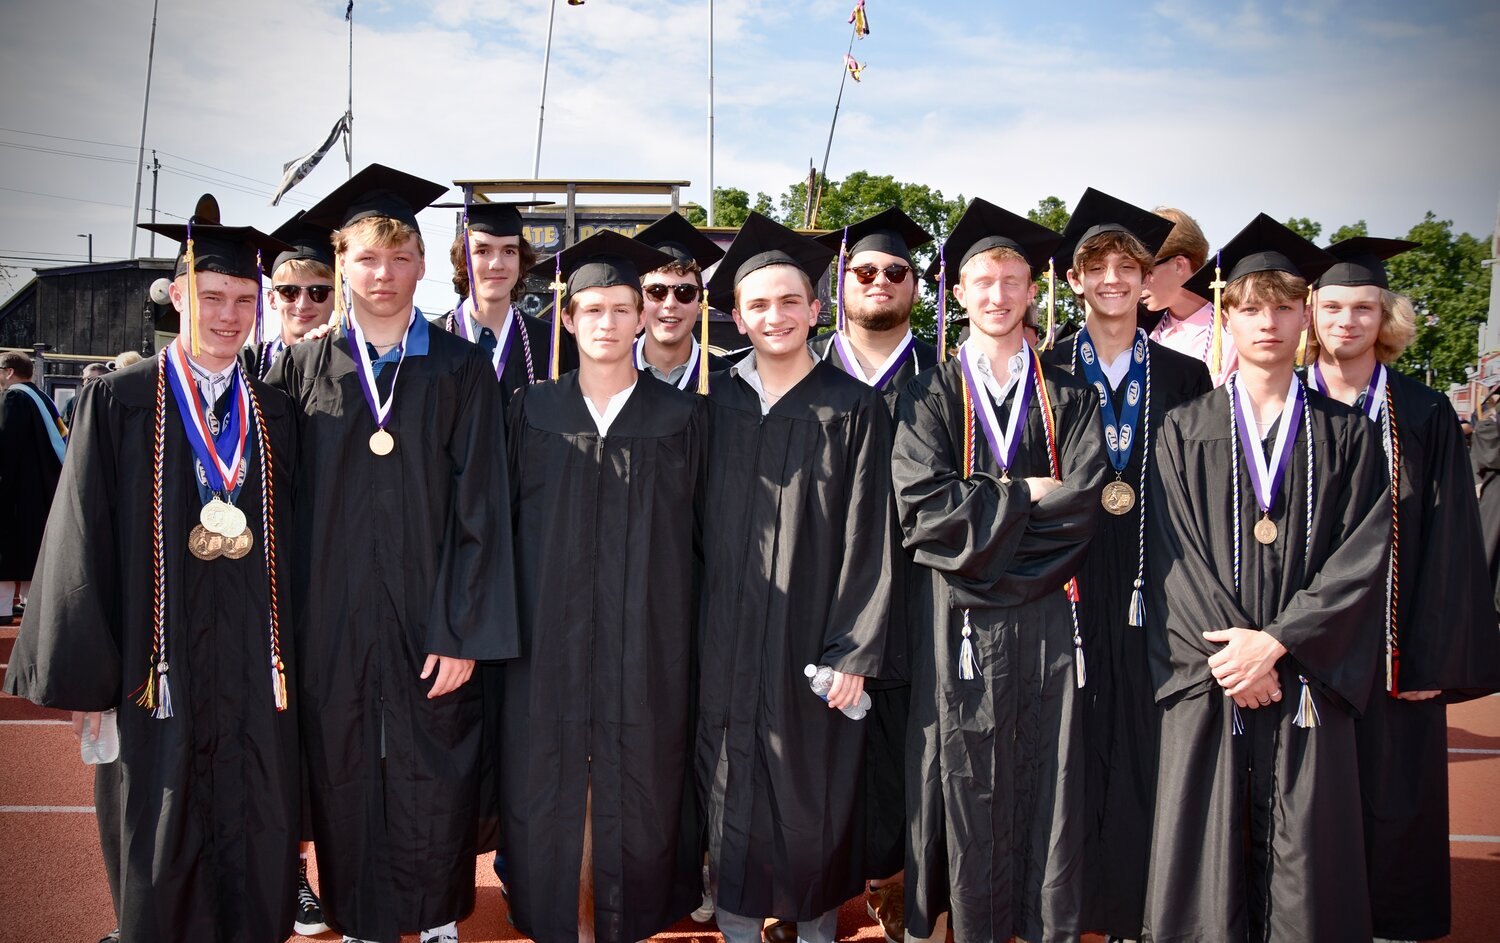 Members of Palisades High School’s Class of 2023 relax on the track at Walter T. Rohrer Stadium on June 2 prior to the start of commencement ceremonies.